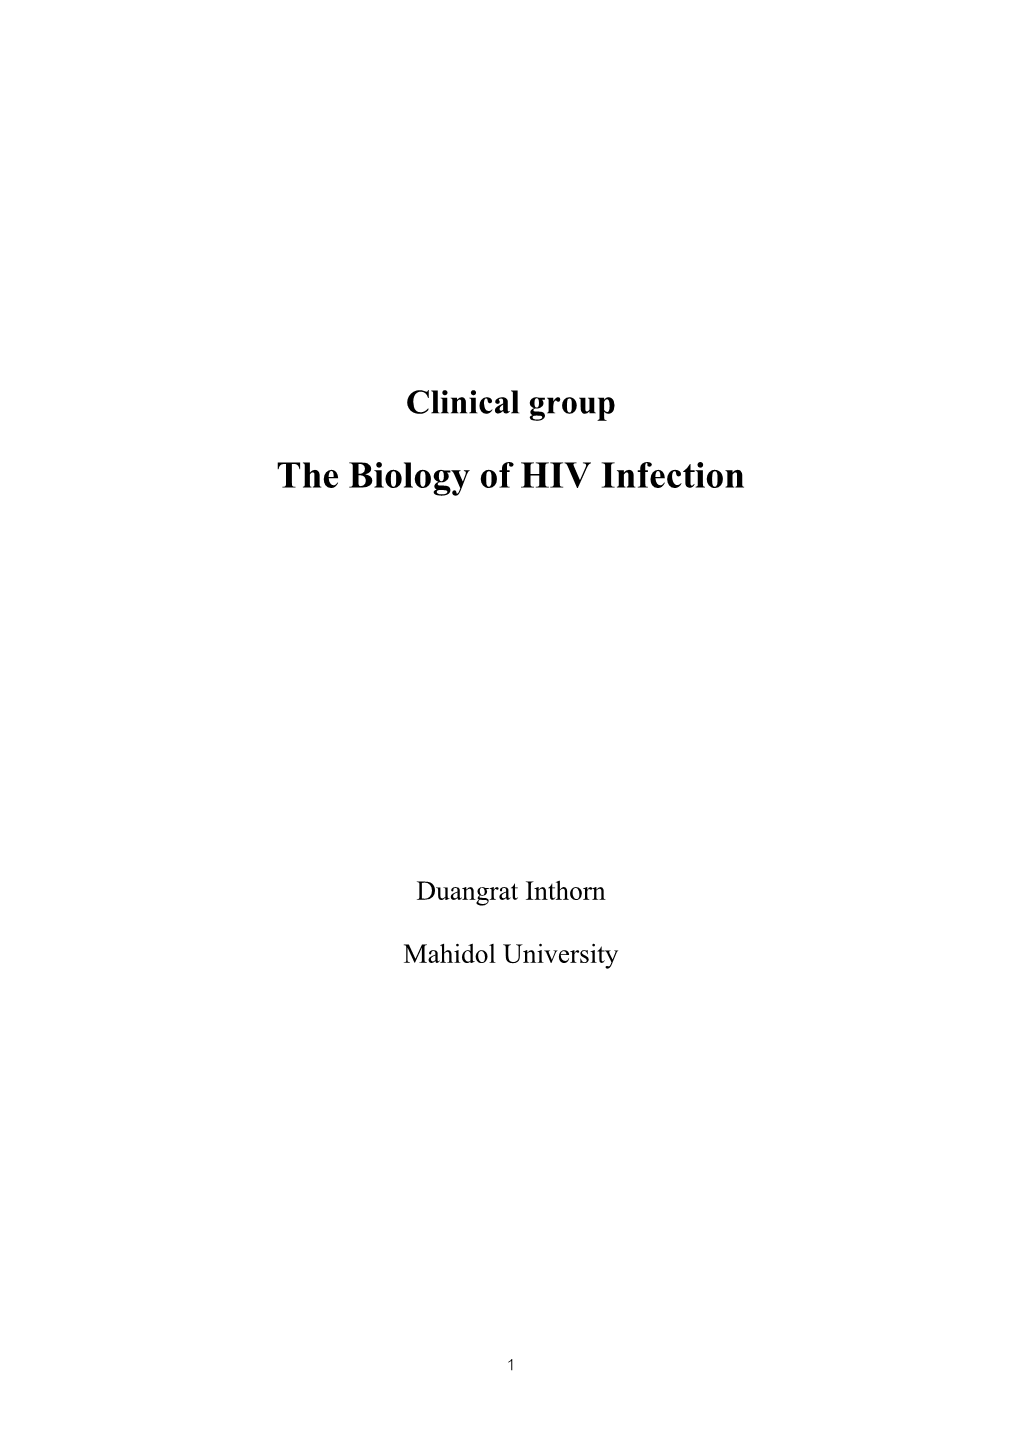 The Biology of HIV Infection